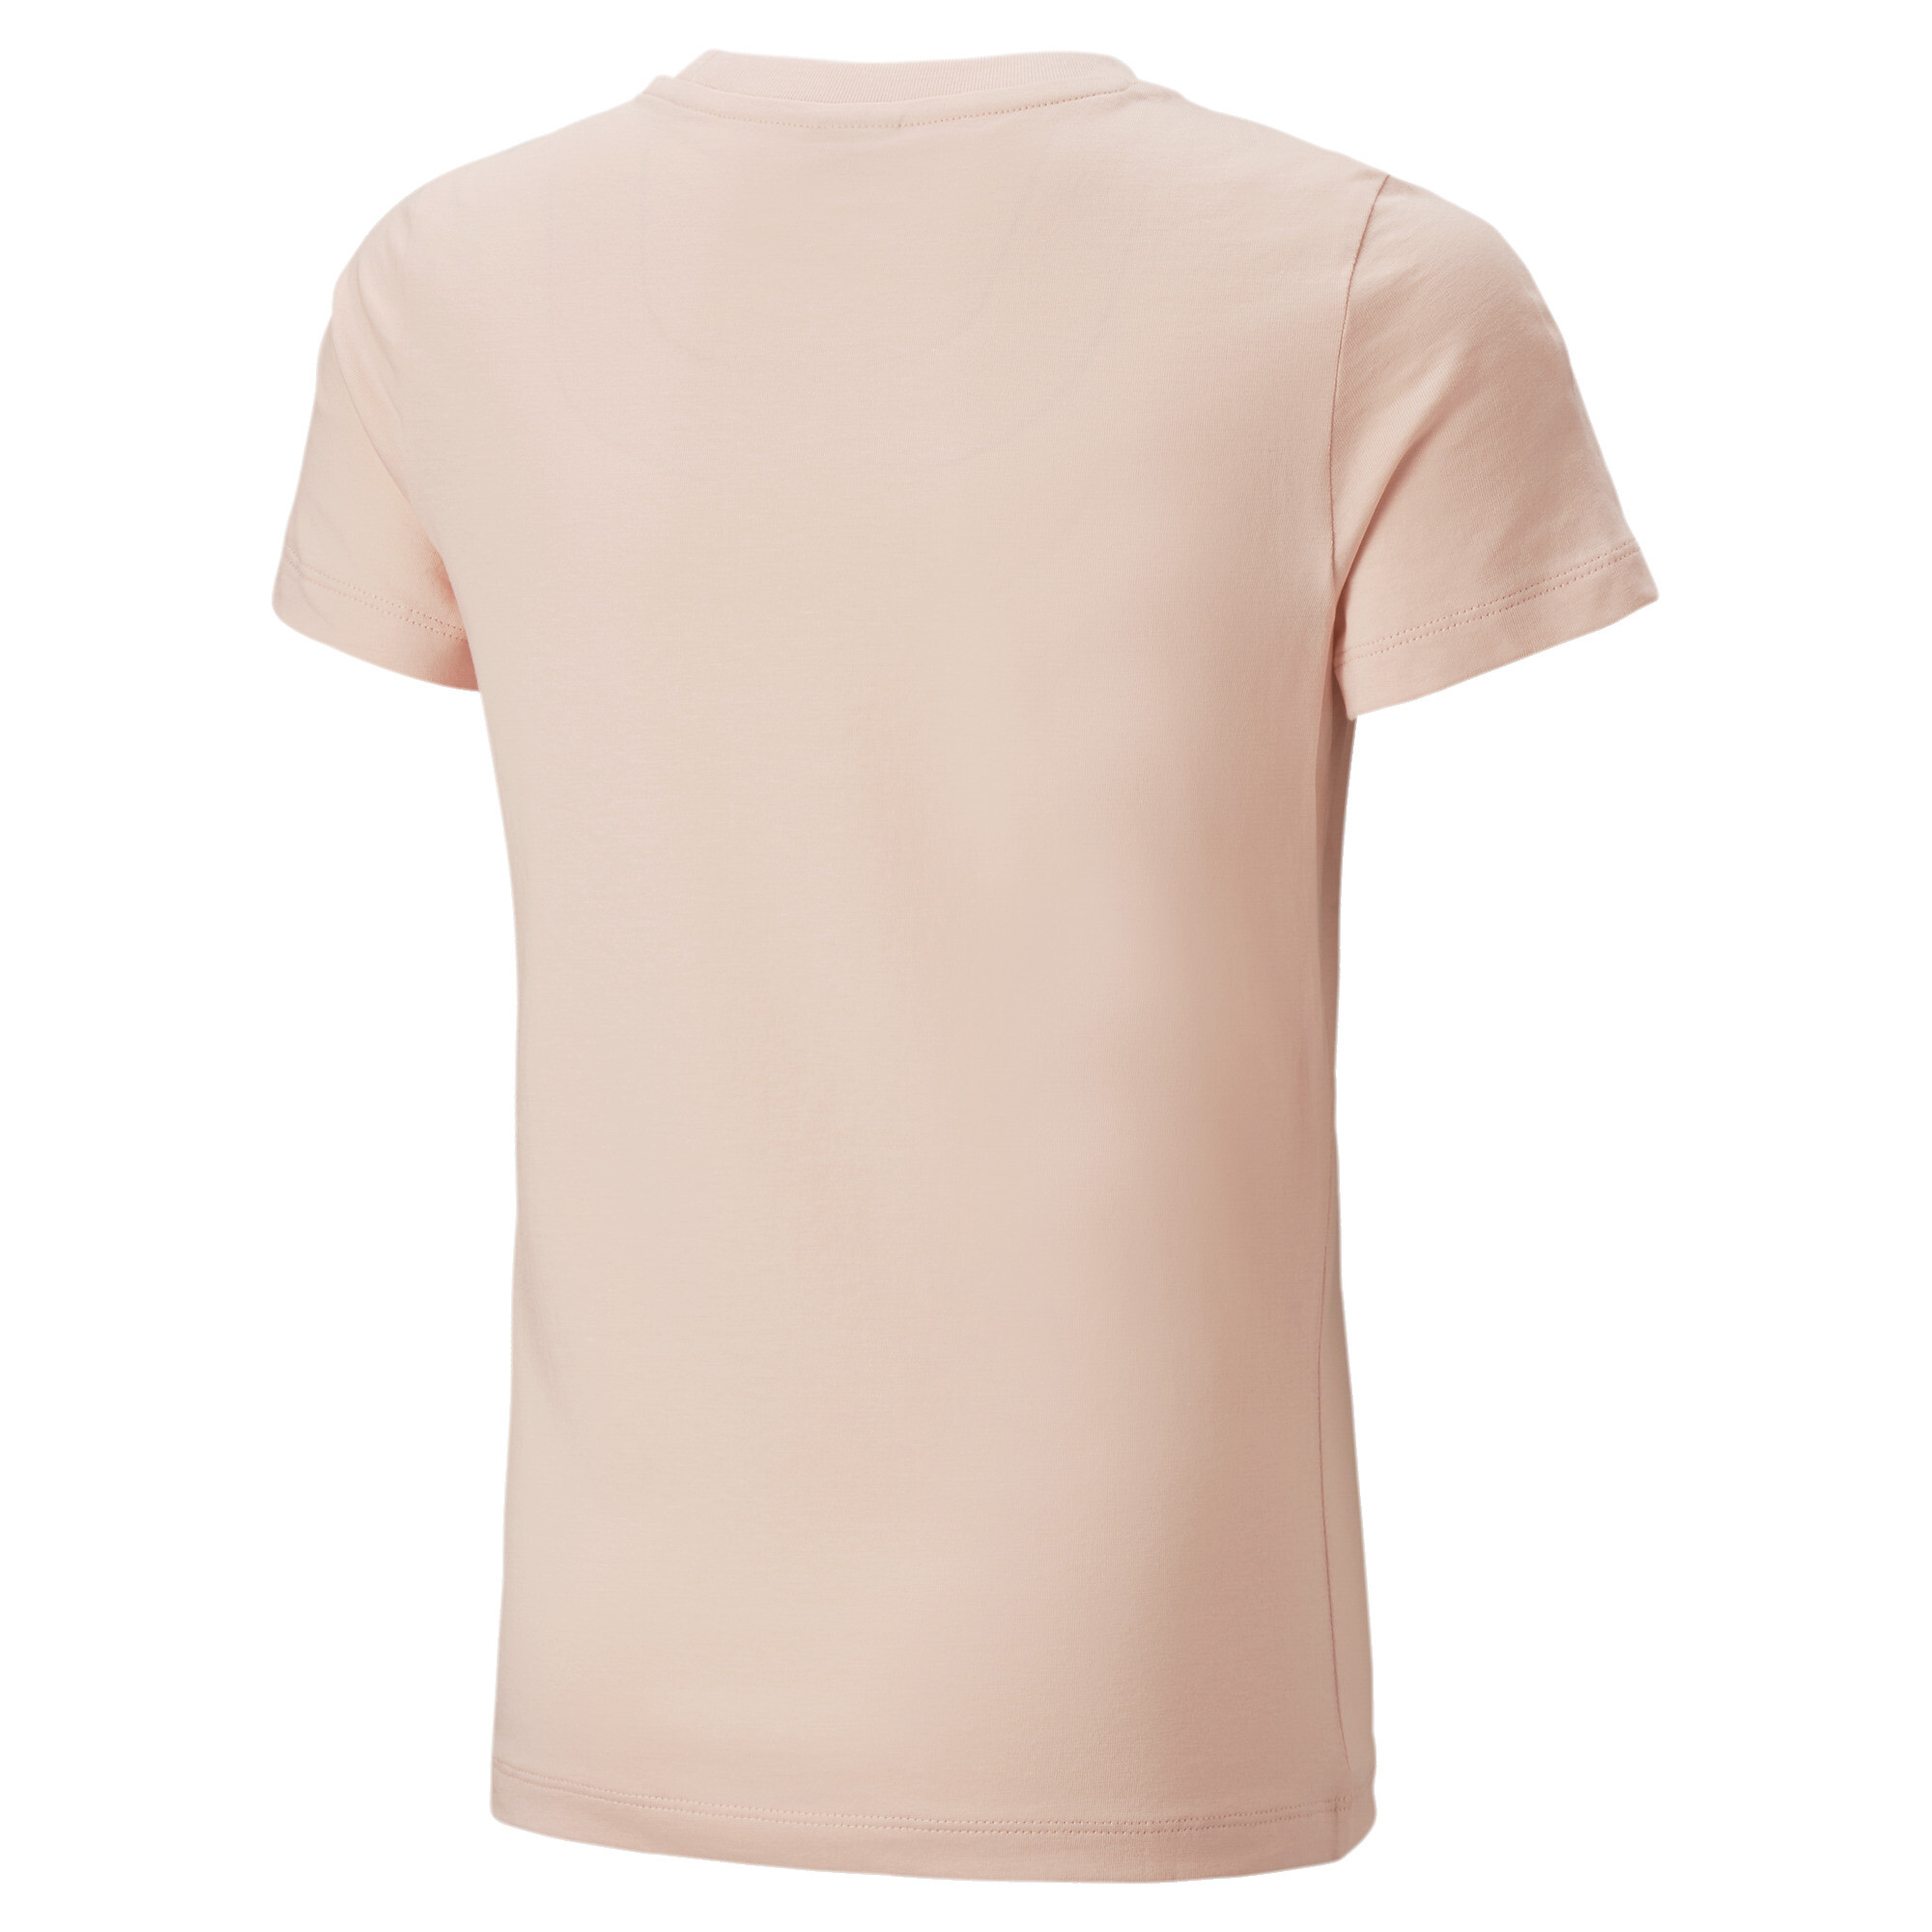 PUMA Classics Logo T-Shirt In Pink, Size 13-14 Youth